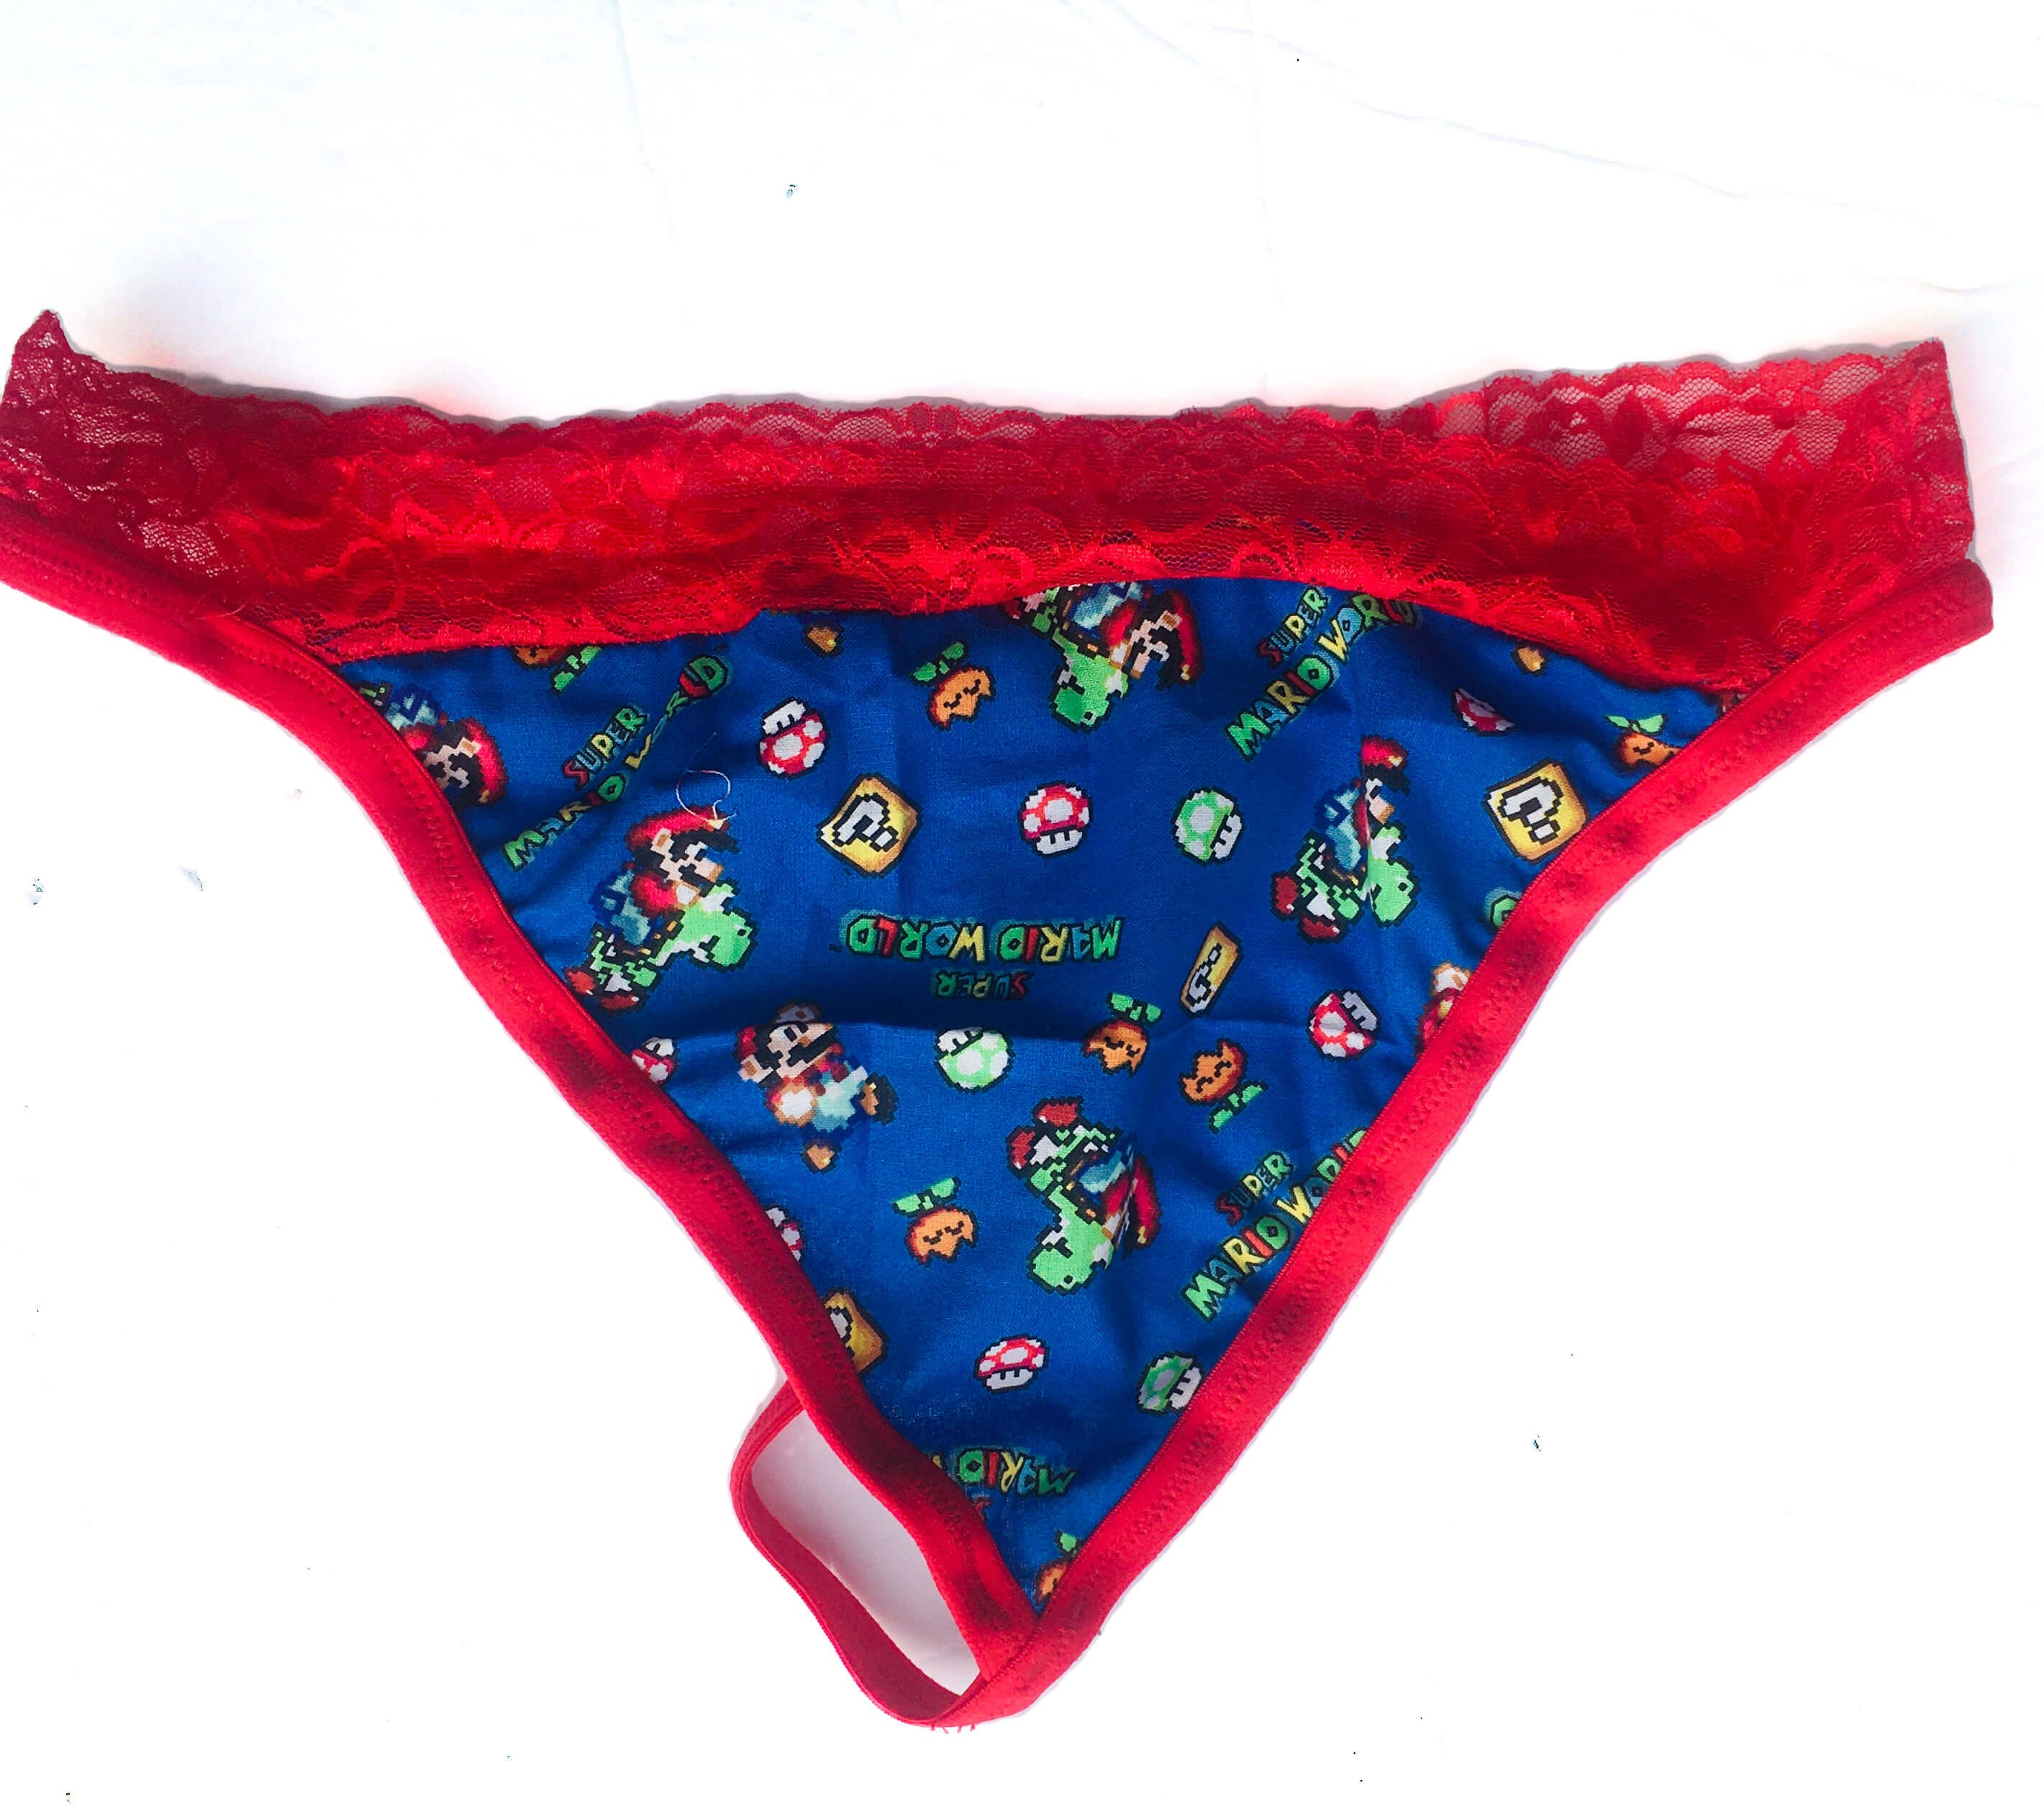 Video games and Mario Red Lace Gstring Thong – Violet Pursuit